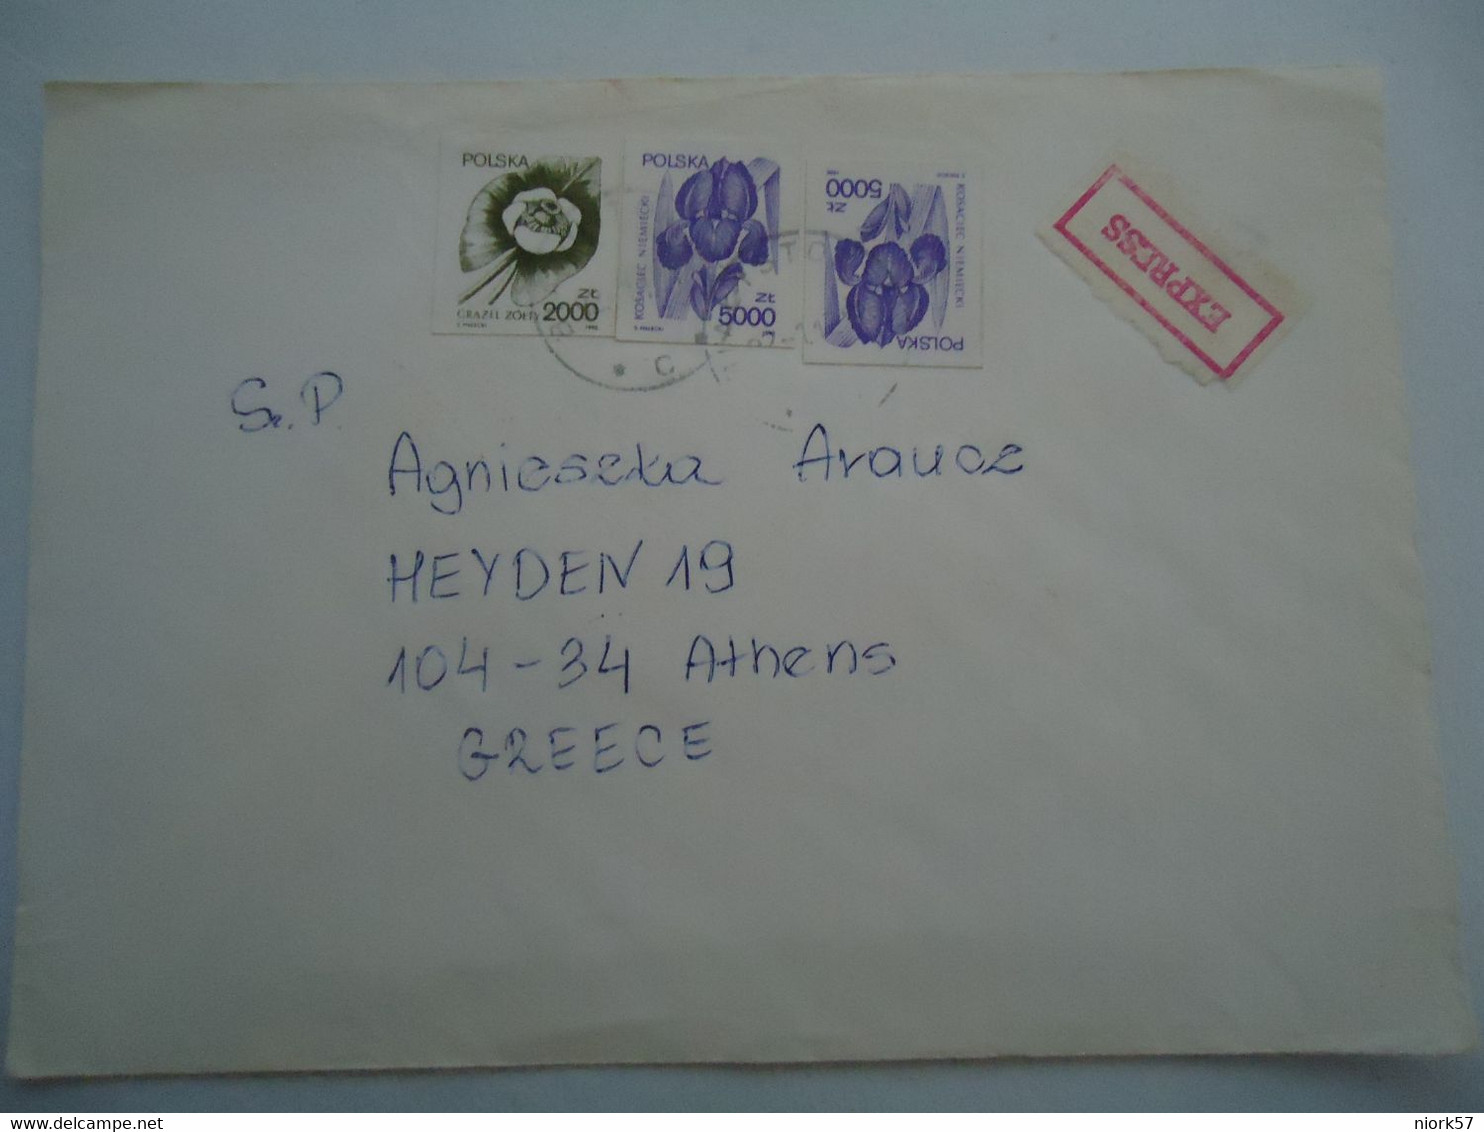 GREECE  POLAND   EXPESS COVER  FLOWERS  USED   POSTMARK  BIAKYSTOA   AND EXPRES ATHENS - Maschinenstempel (Werbestempel)